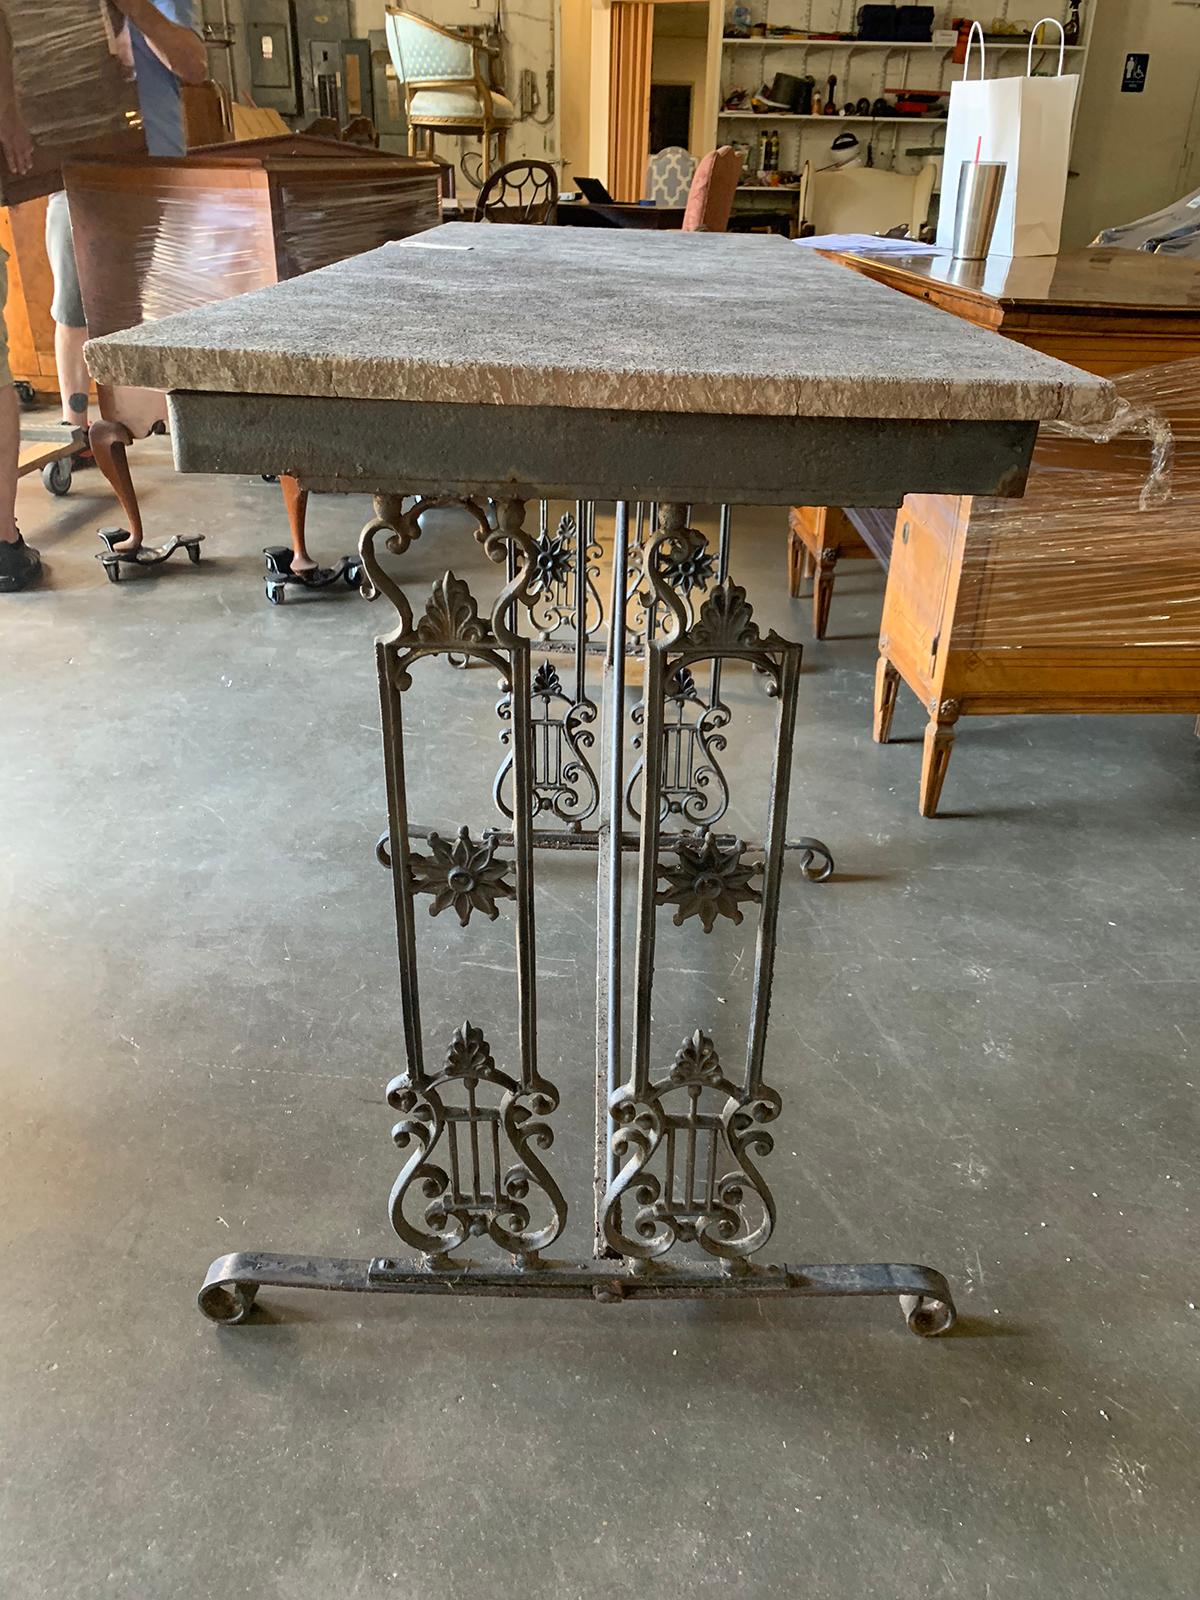 Early 20th Century Empire Style Cast Iron Garden Table with Stone Top, circa 1900